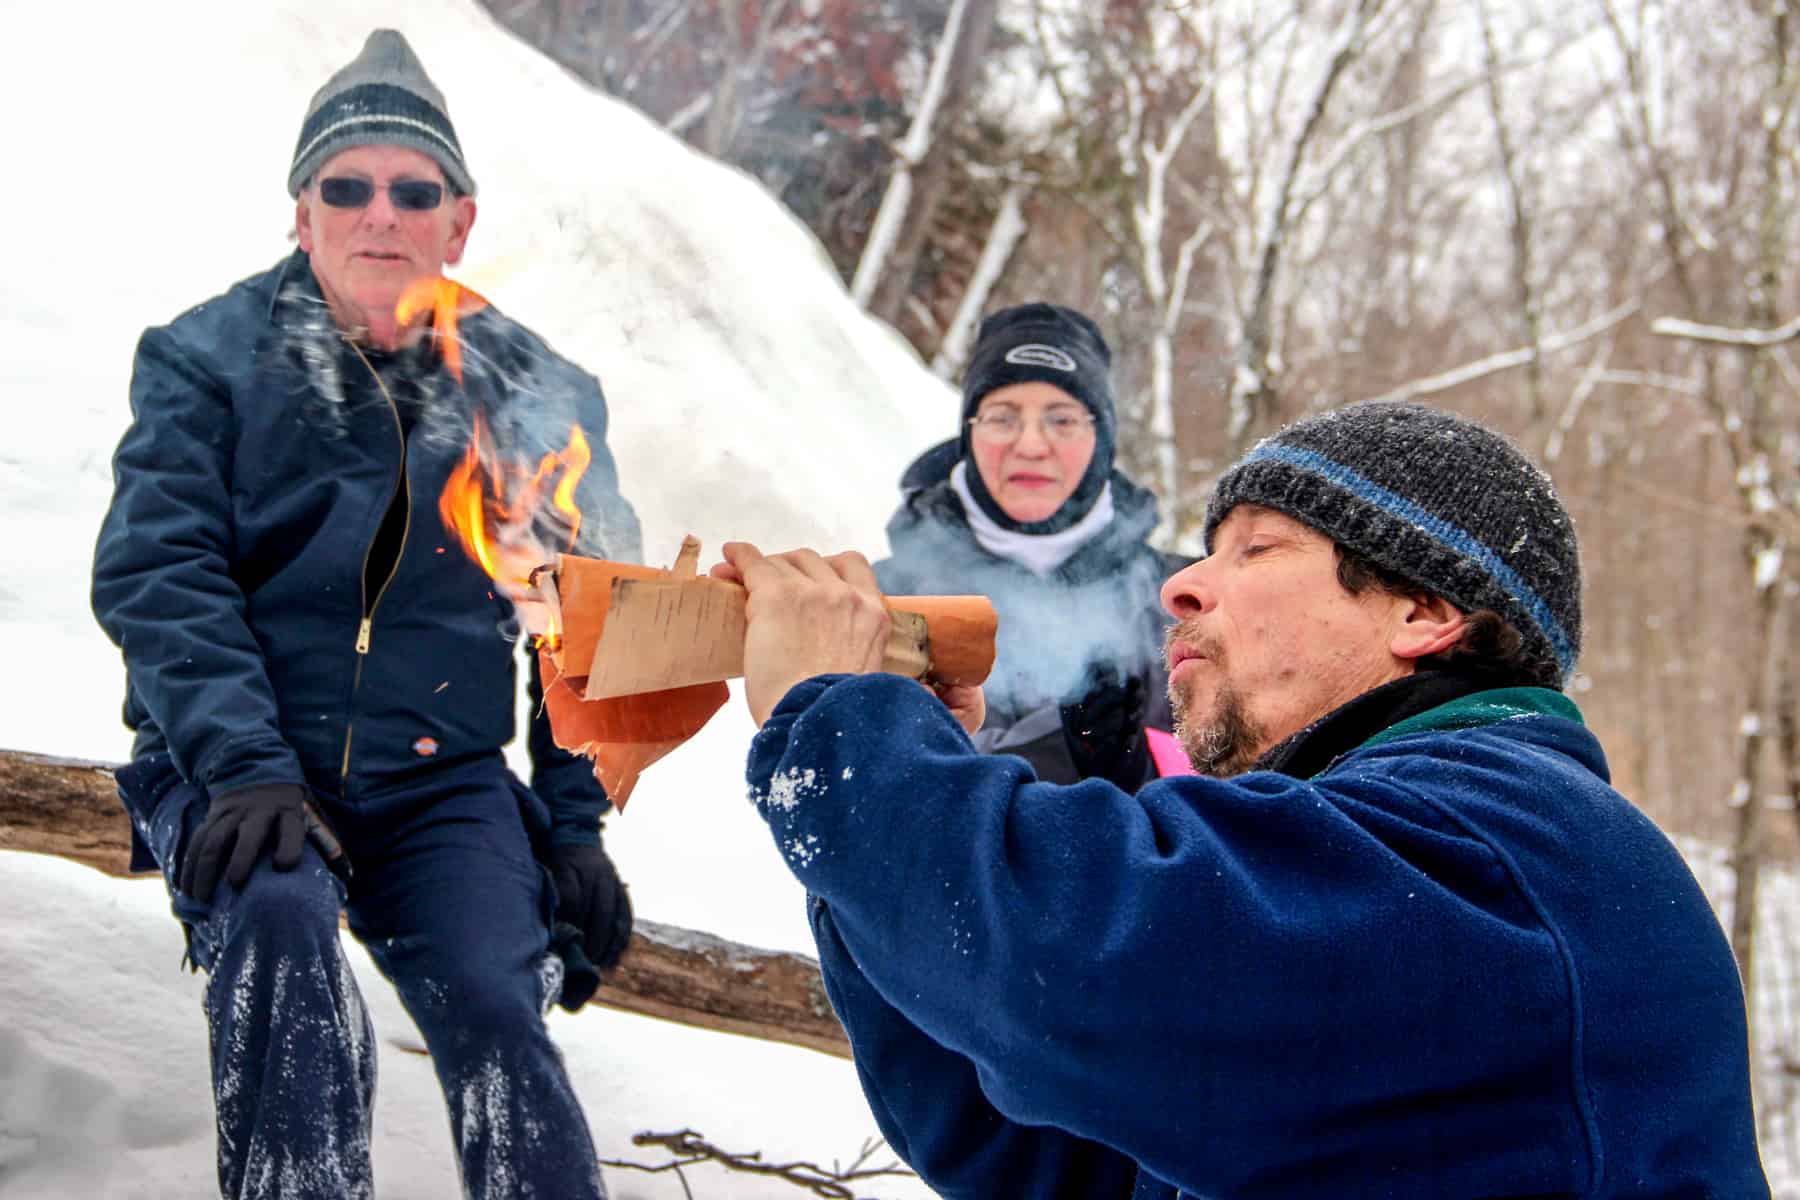 Two people watch a man in a forest heaped with snow as he blows into a roll of paper, making fire.